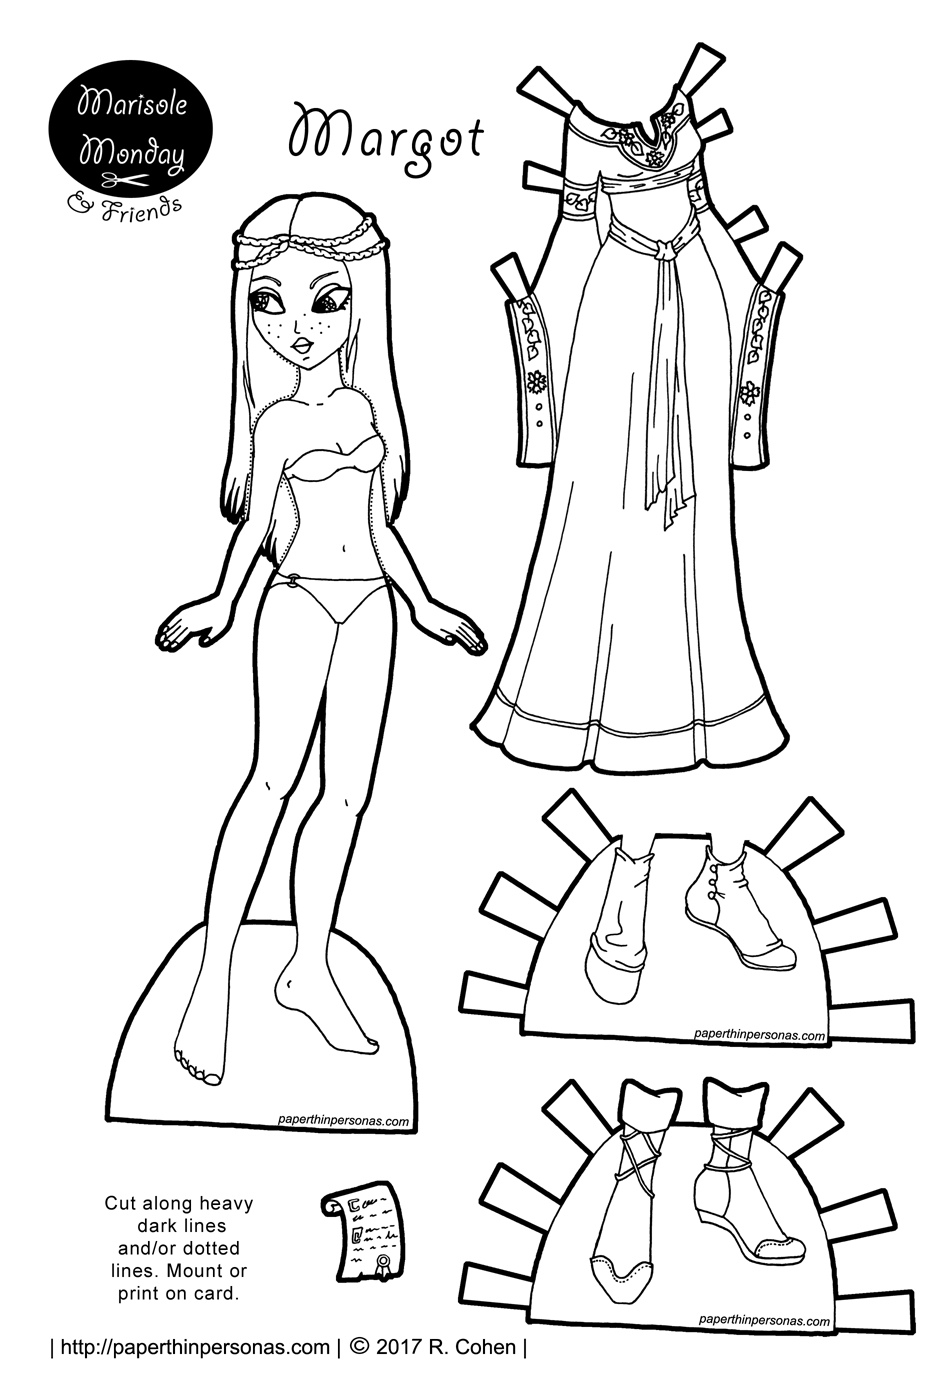 Medieval Fantasy Princess Paper Doll To Print In Color Or Black And - Medieval Paper Dolls Free Printable